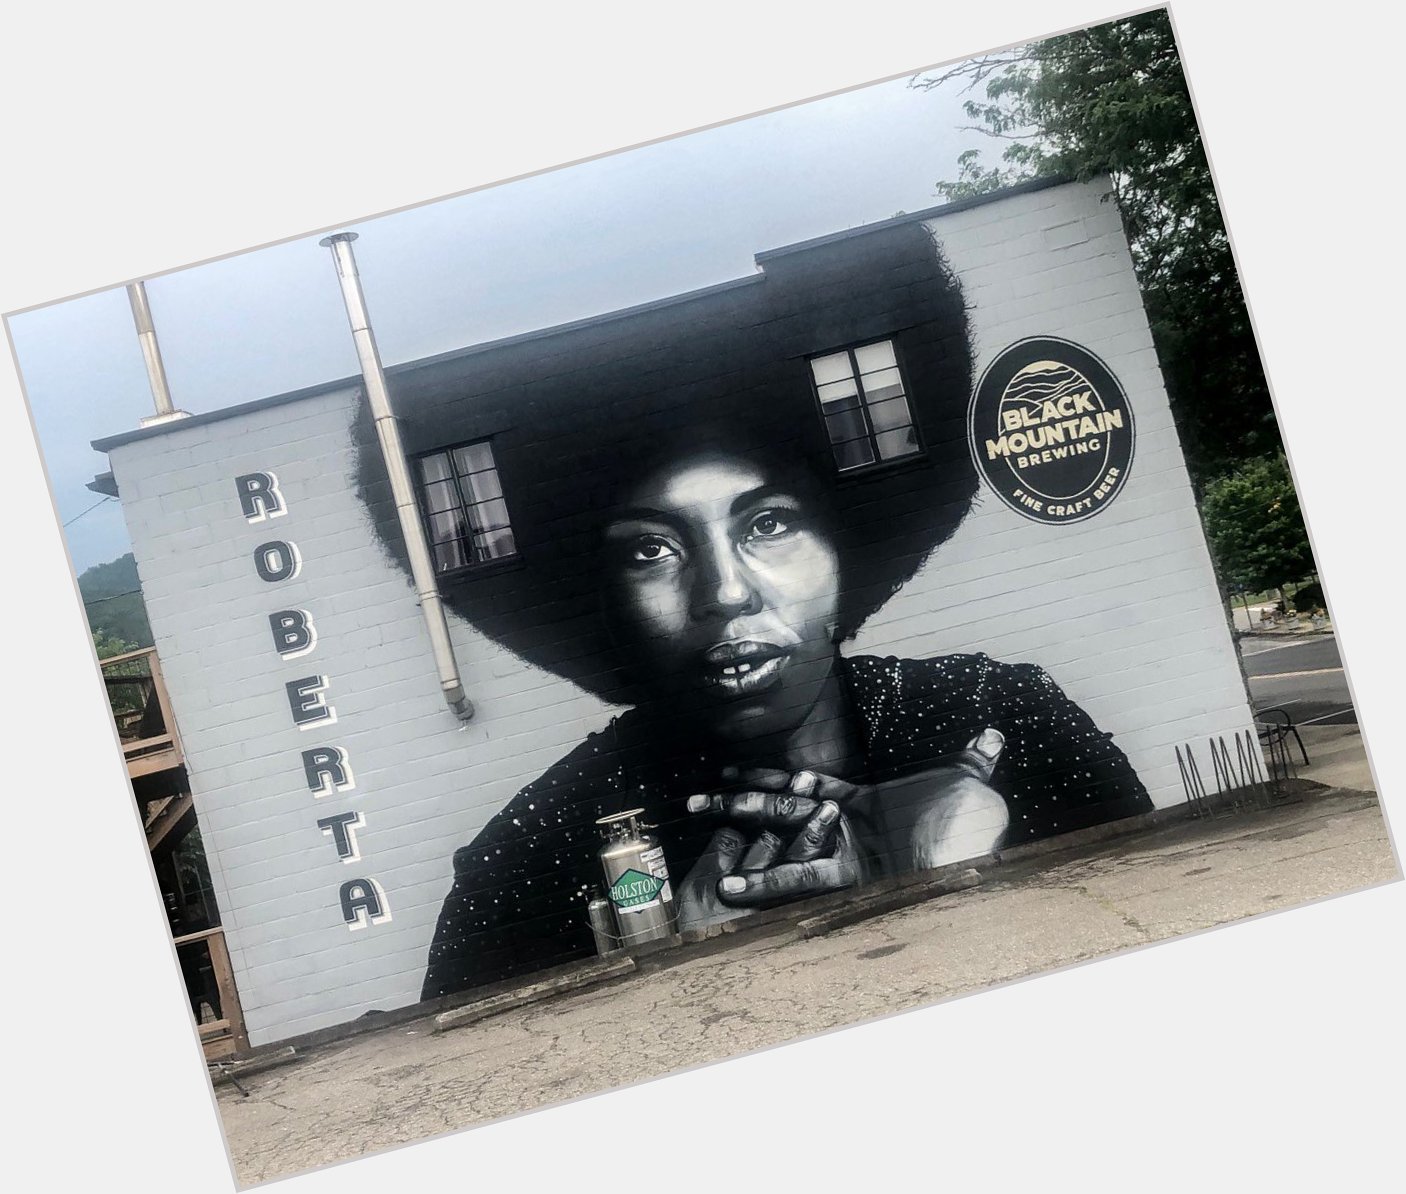 Happy 86th birthday to Roberta Flack. The mural is in her birthplace of Black Mountain, NC.   